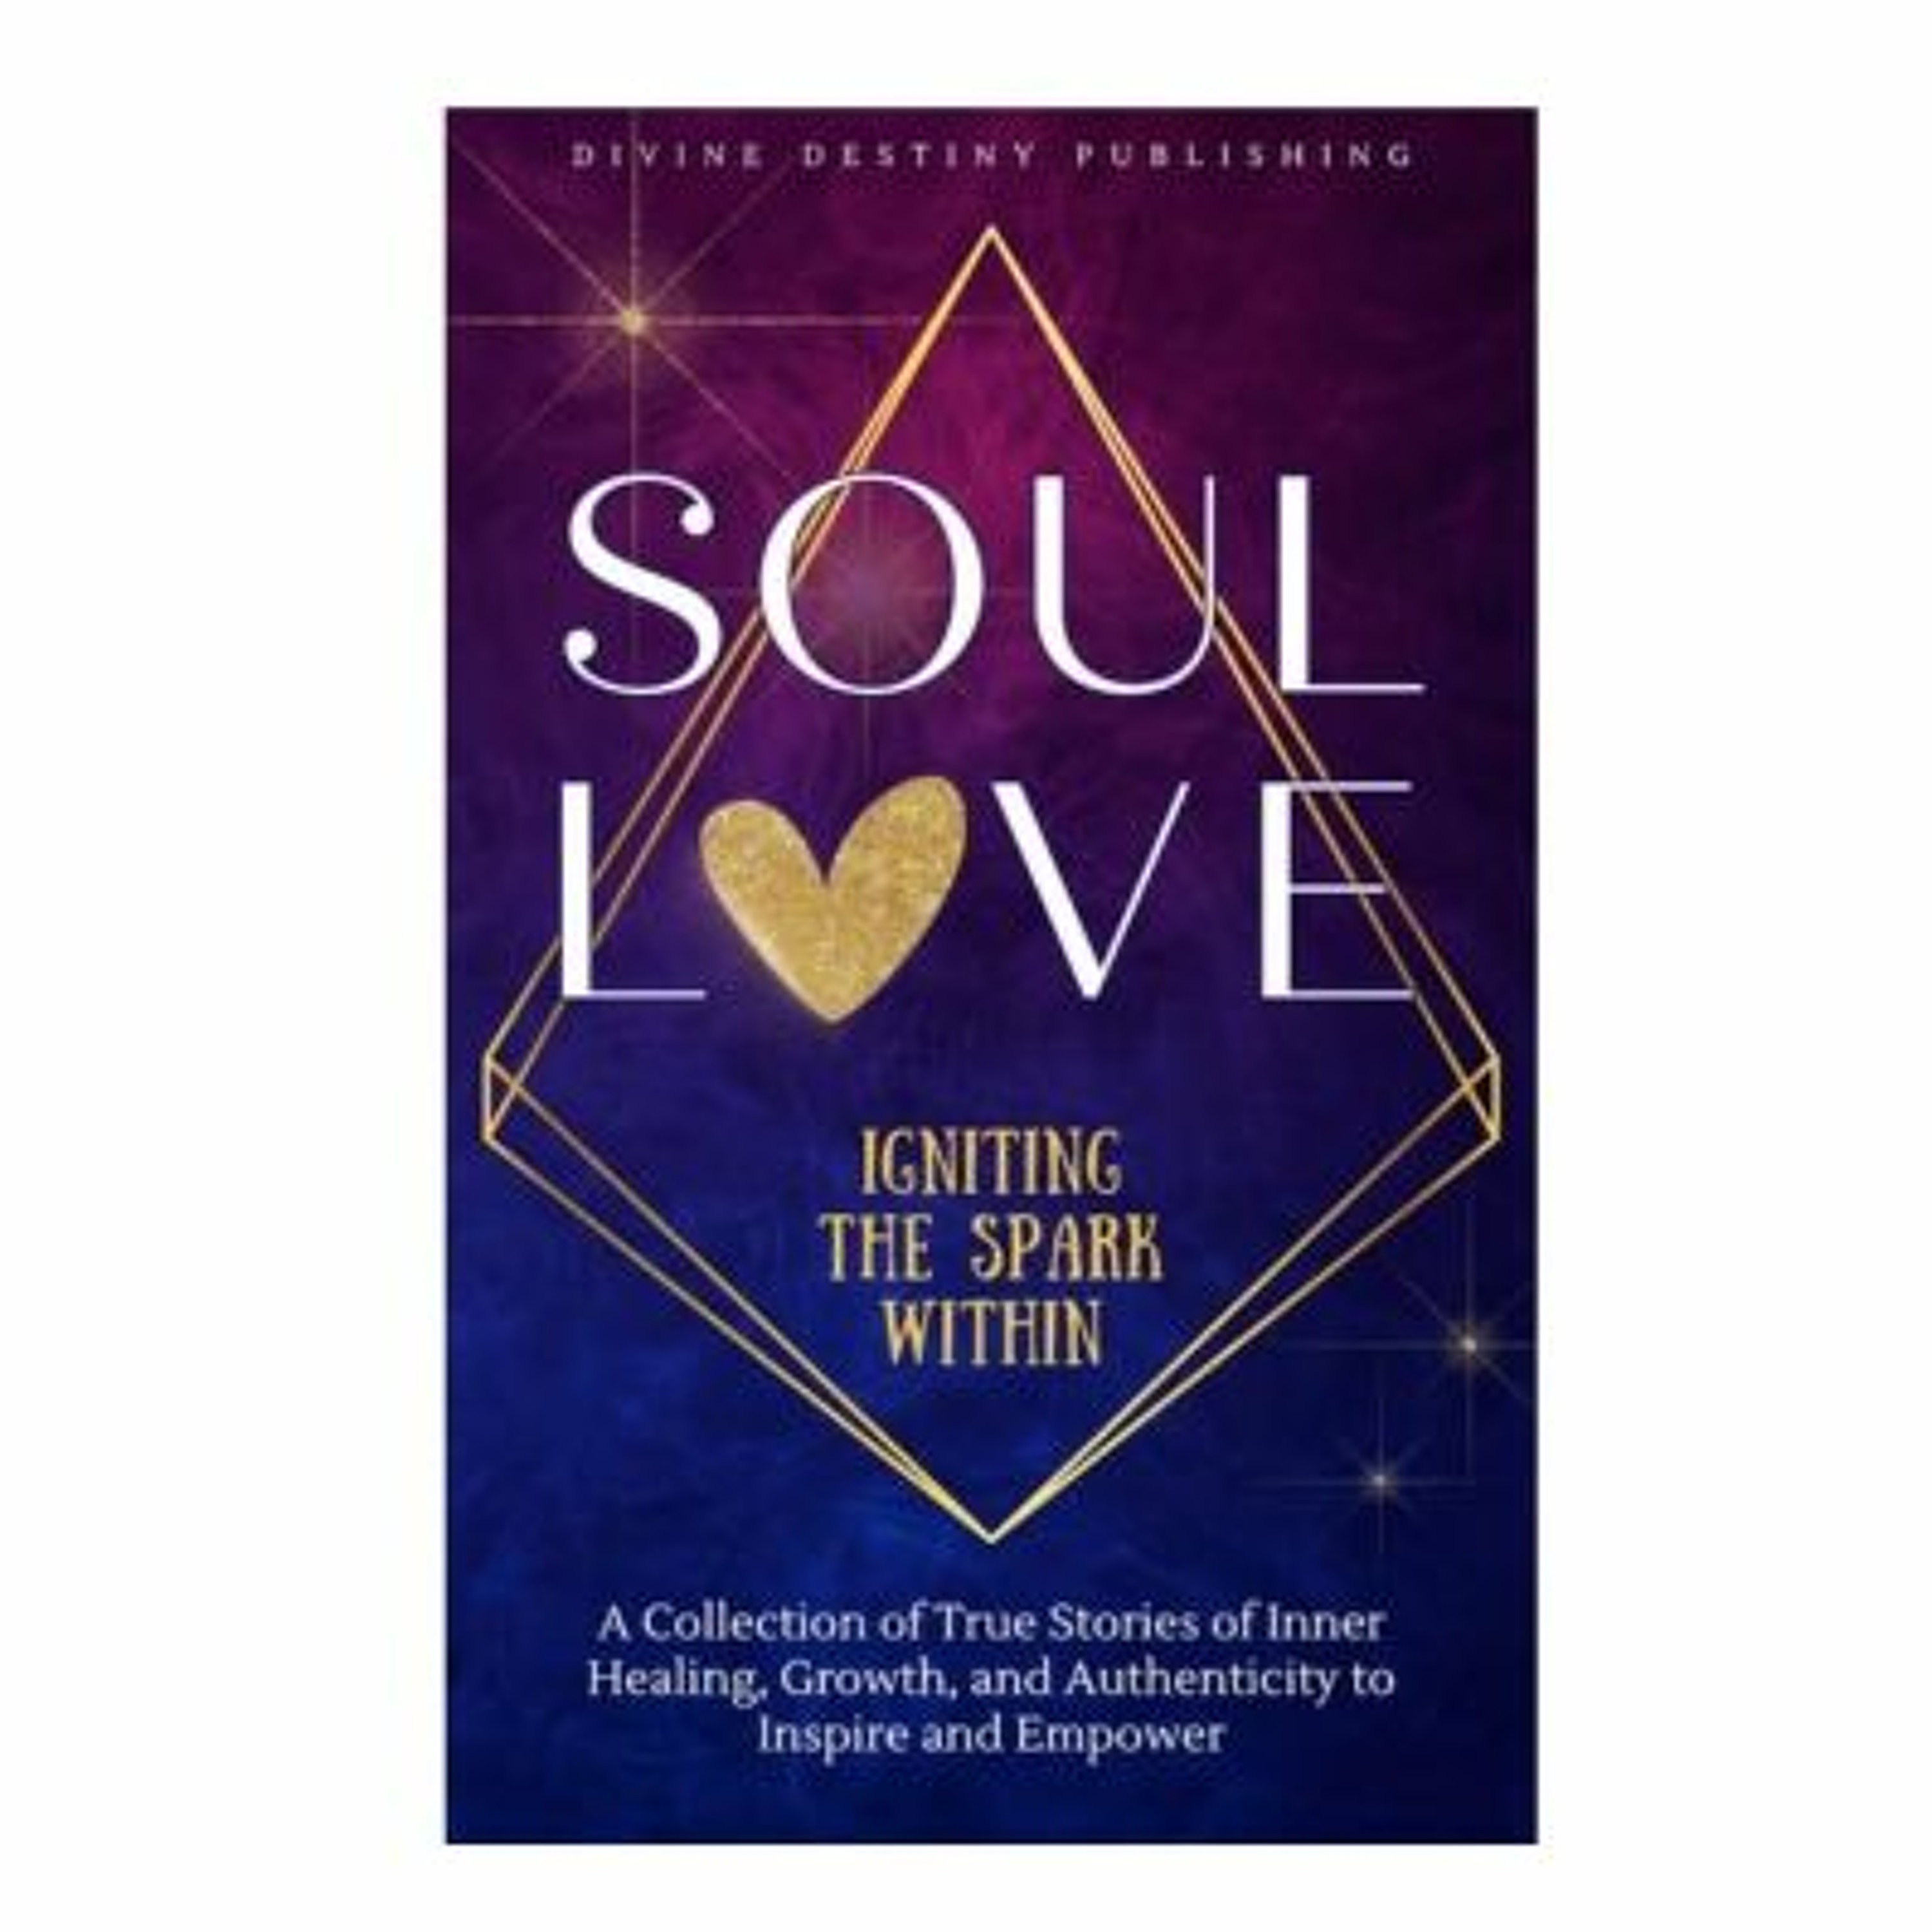 Podcast 1075: Soul Love with Paul Marwood